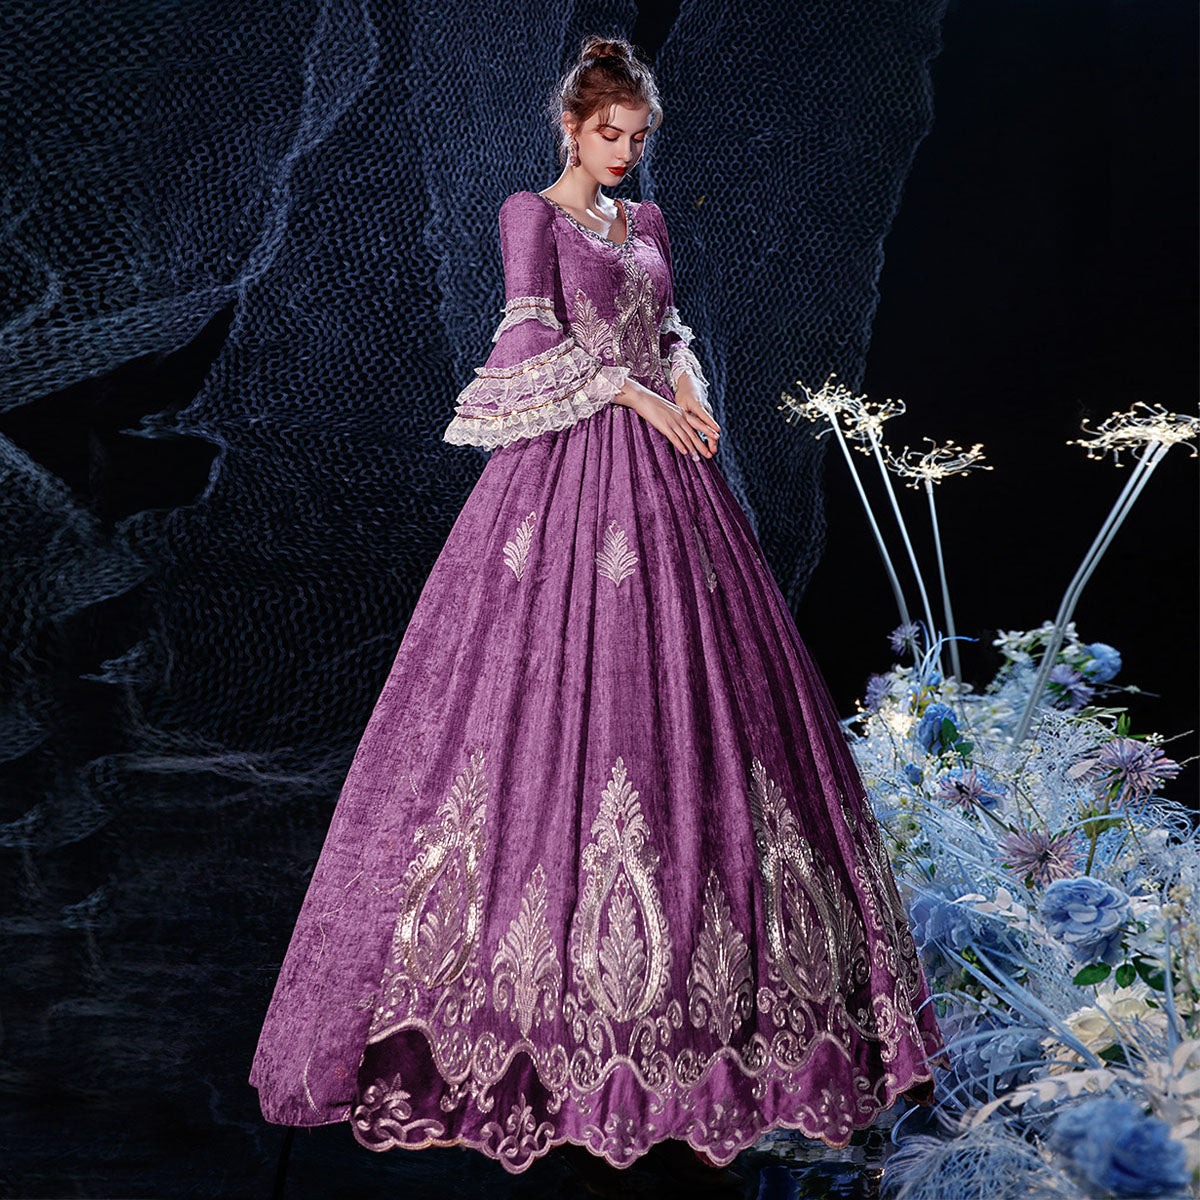 Purple Rococo Southern Belle Queen Masquerade Dress Maire Antoinette Dress